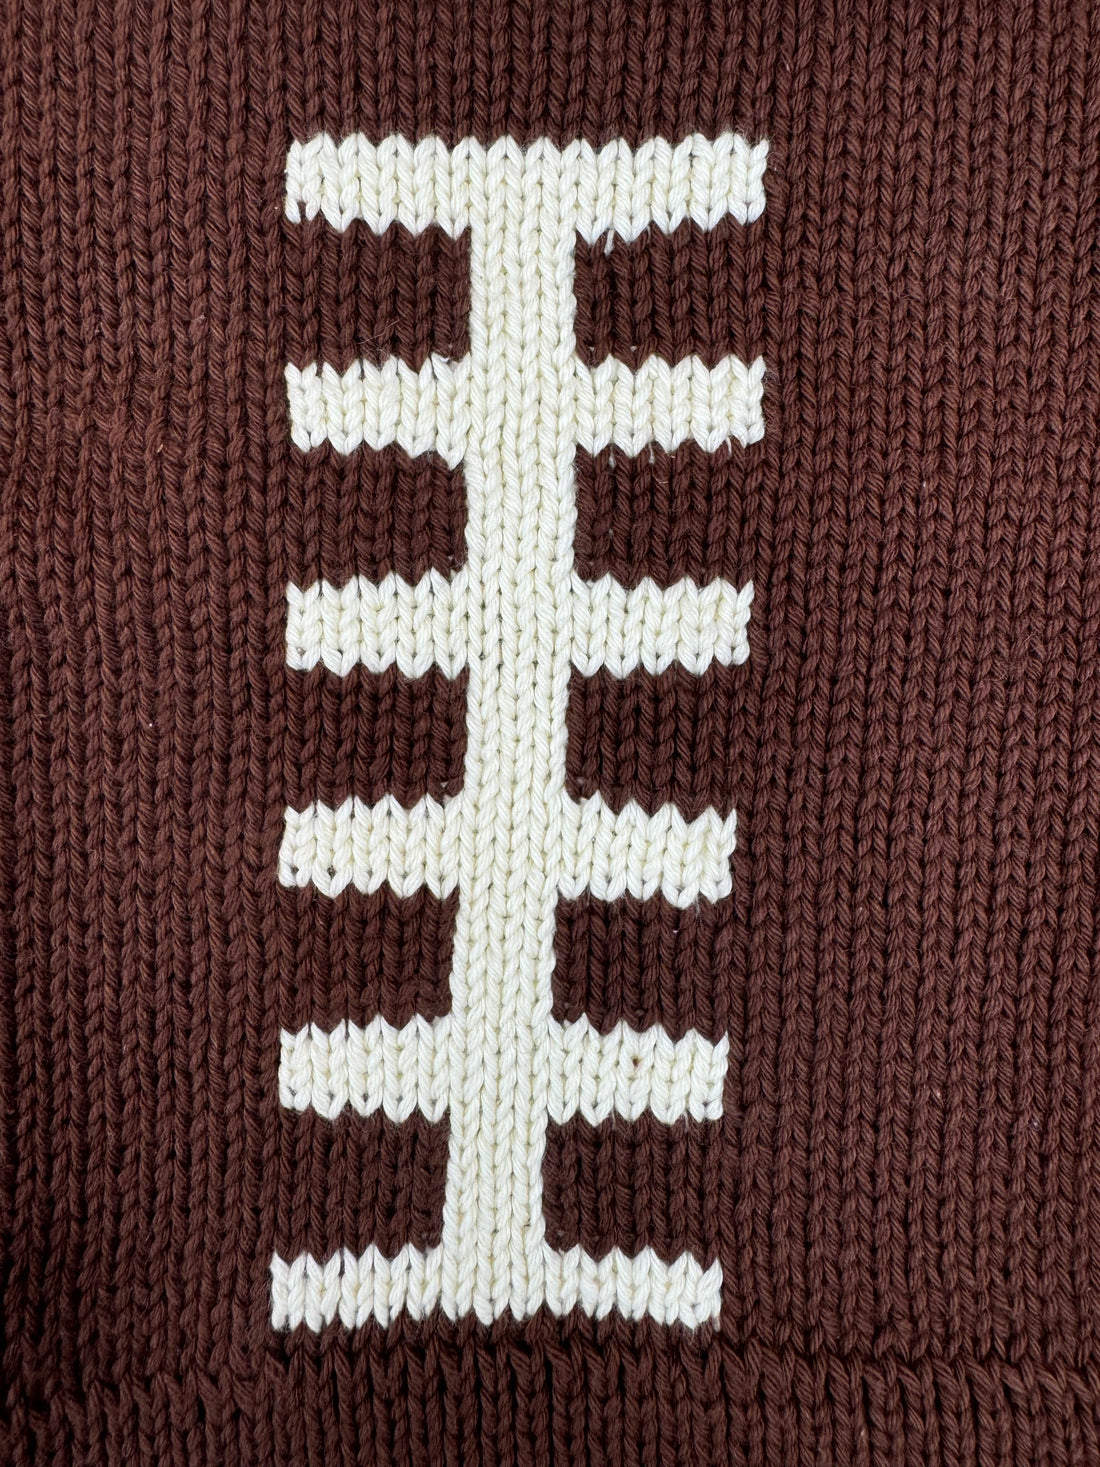 close up of &quot;football stitching&quot;